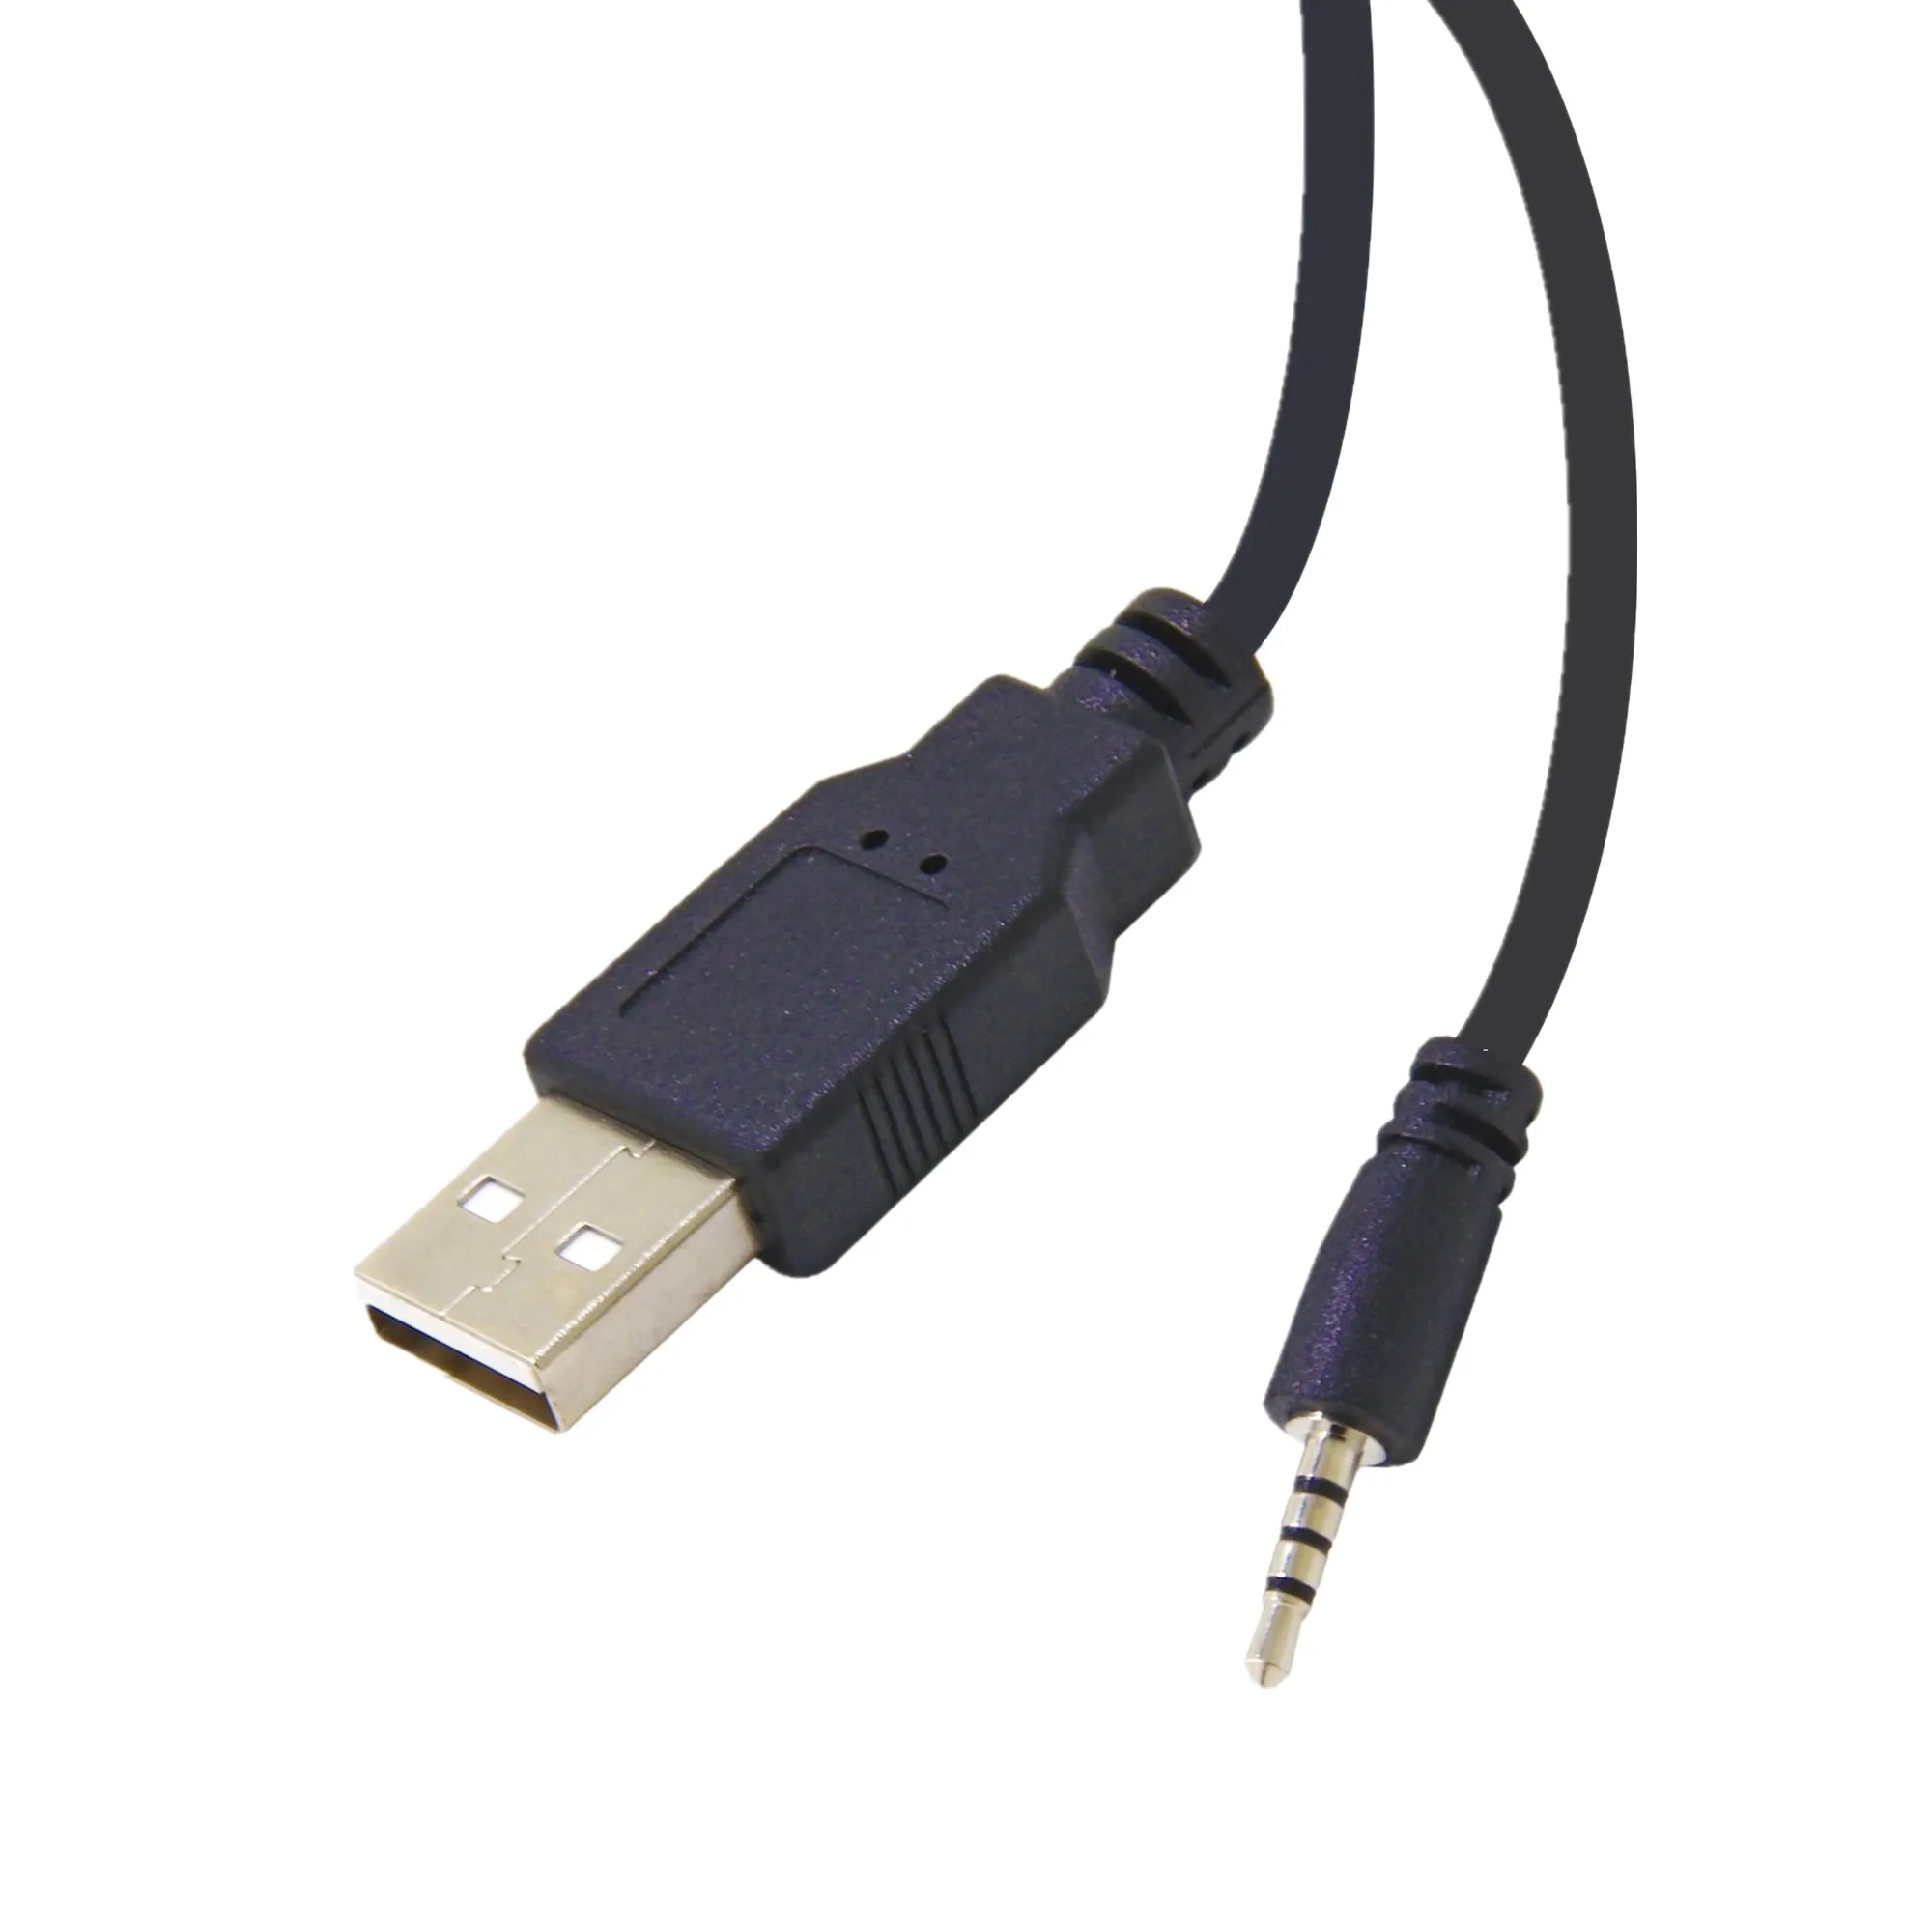 2.5mm USB charging charger cable for JBL Synchros E40BT/E50BT/J56BT Headphones USB charge